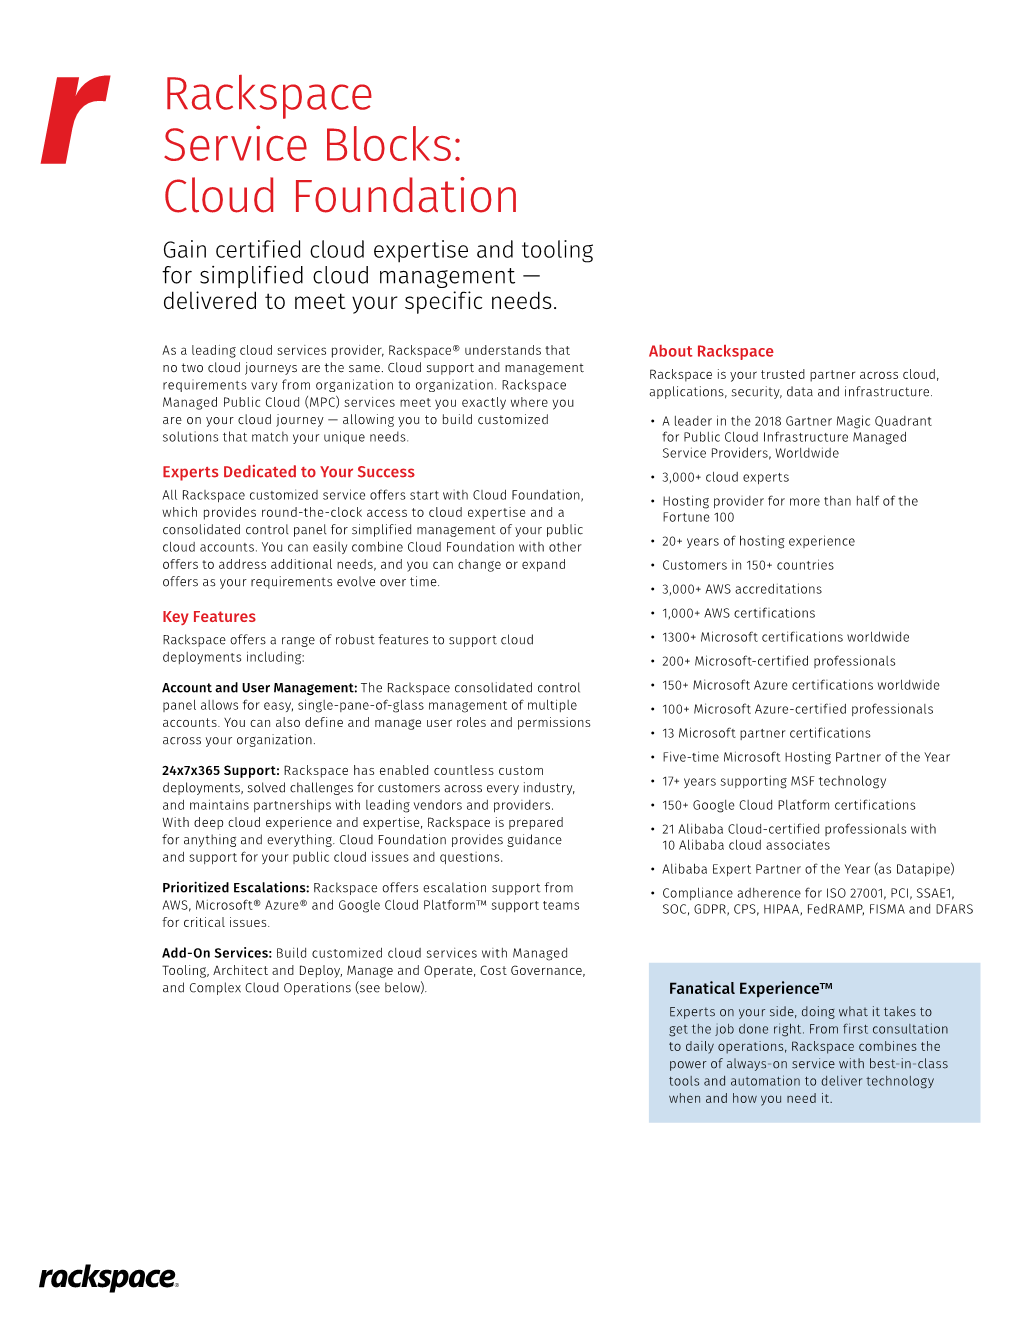 Cloud Foundation Gain Certified Cloud Expertise and Tooling for Simplified Cloud Management — Delivered to Meet Your Specific Needs